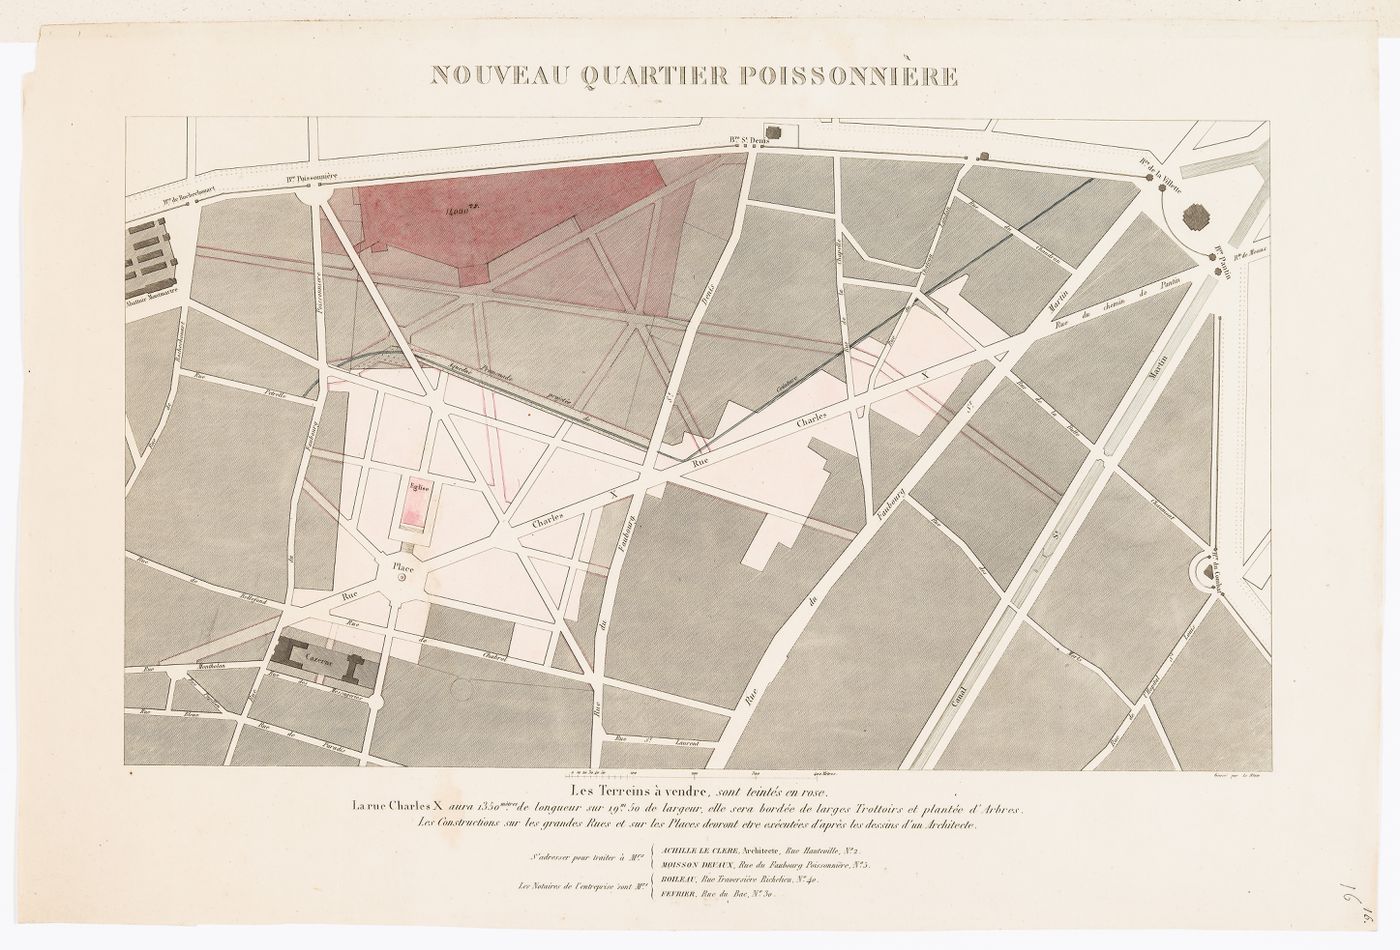 Site plan for the nouveau quartier Poissonnière showing the proposed rue Charles X, and a block plan for the horse auction house and infirmary, Clos St. Charles